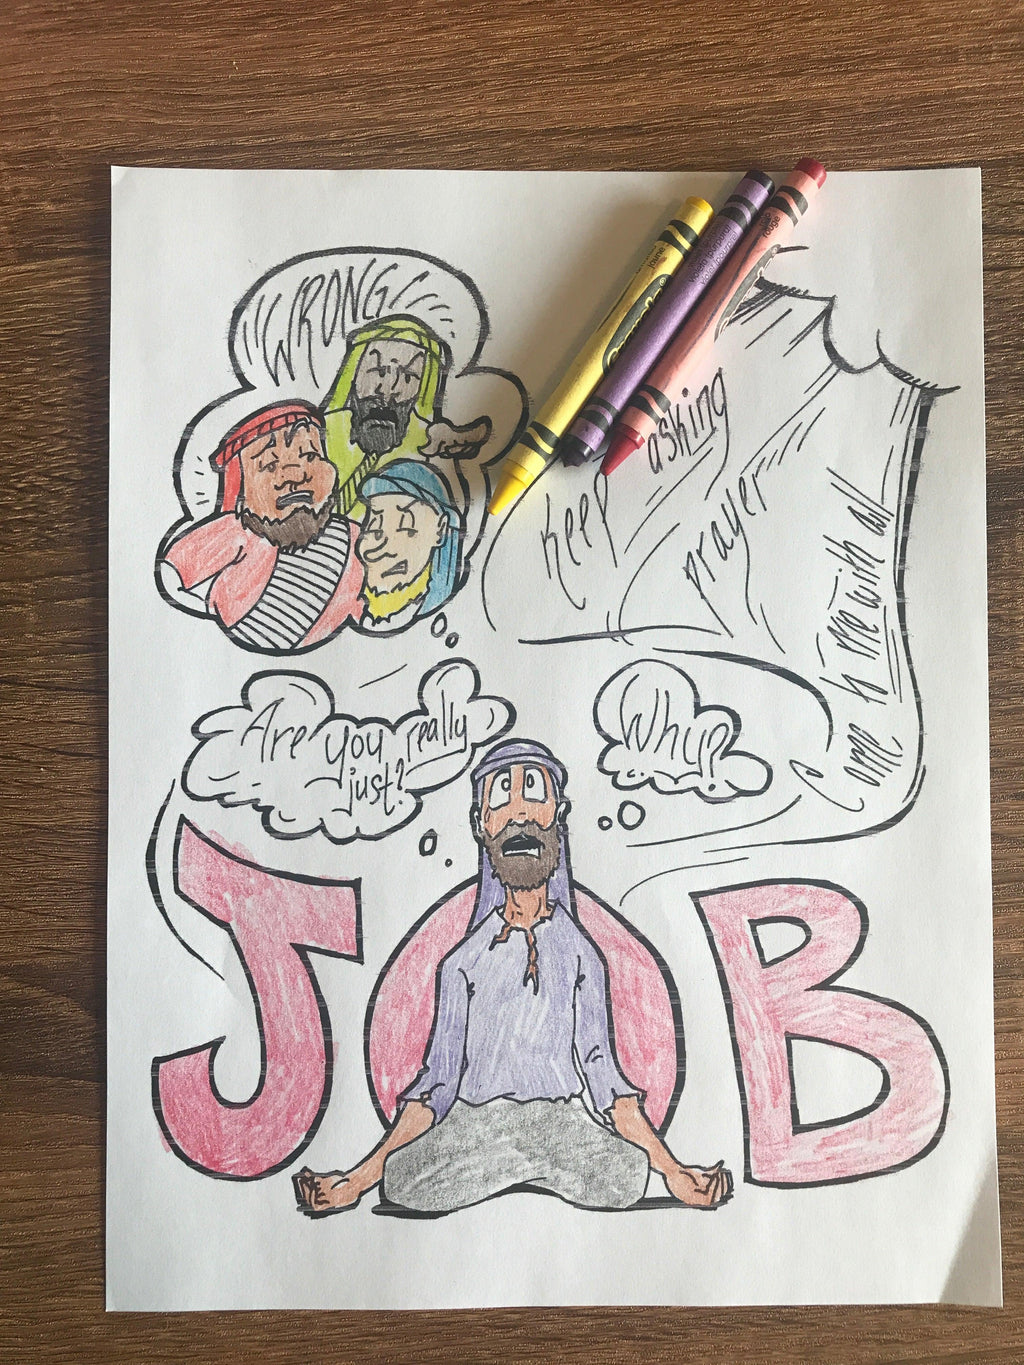 job bible coloring pages for kids